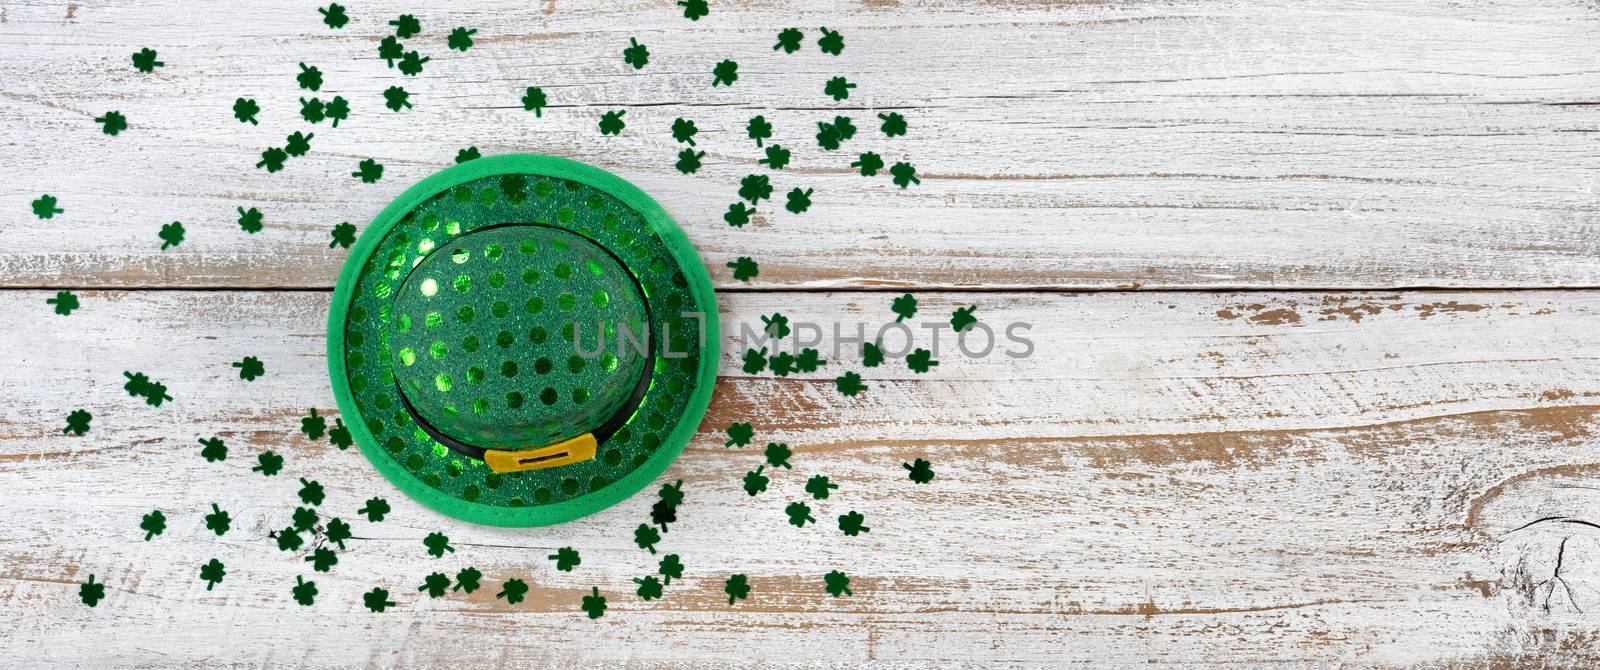 St Patricks Hat and Clovers on rustic wooden background by tab1962